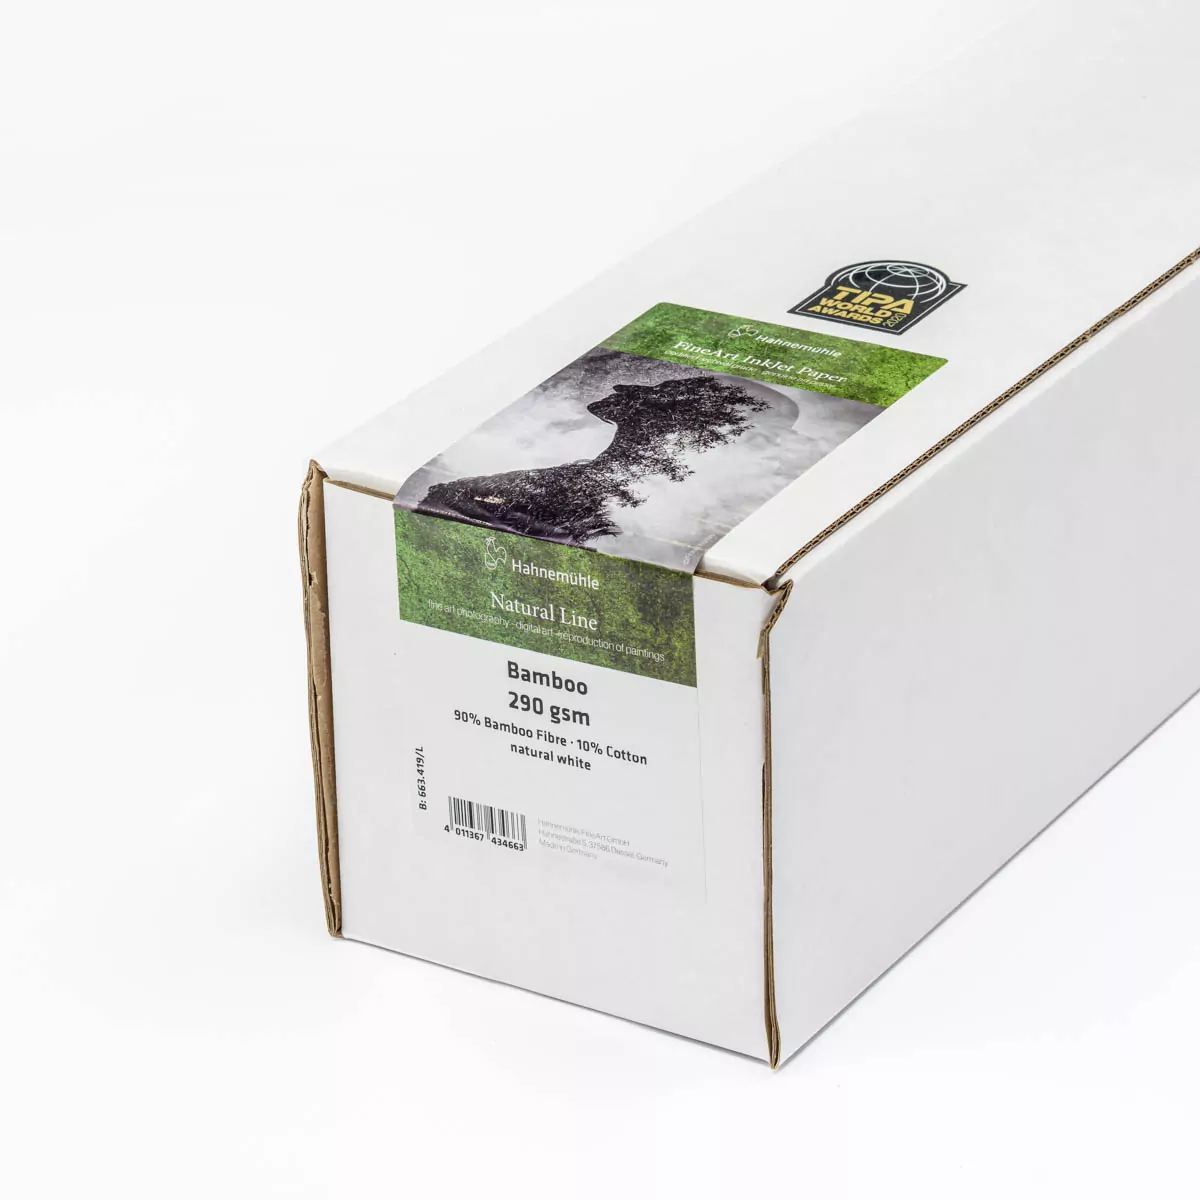 Hahnemuhle Bamboo 290gsm 36"(91cm)x12m roll